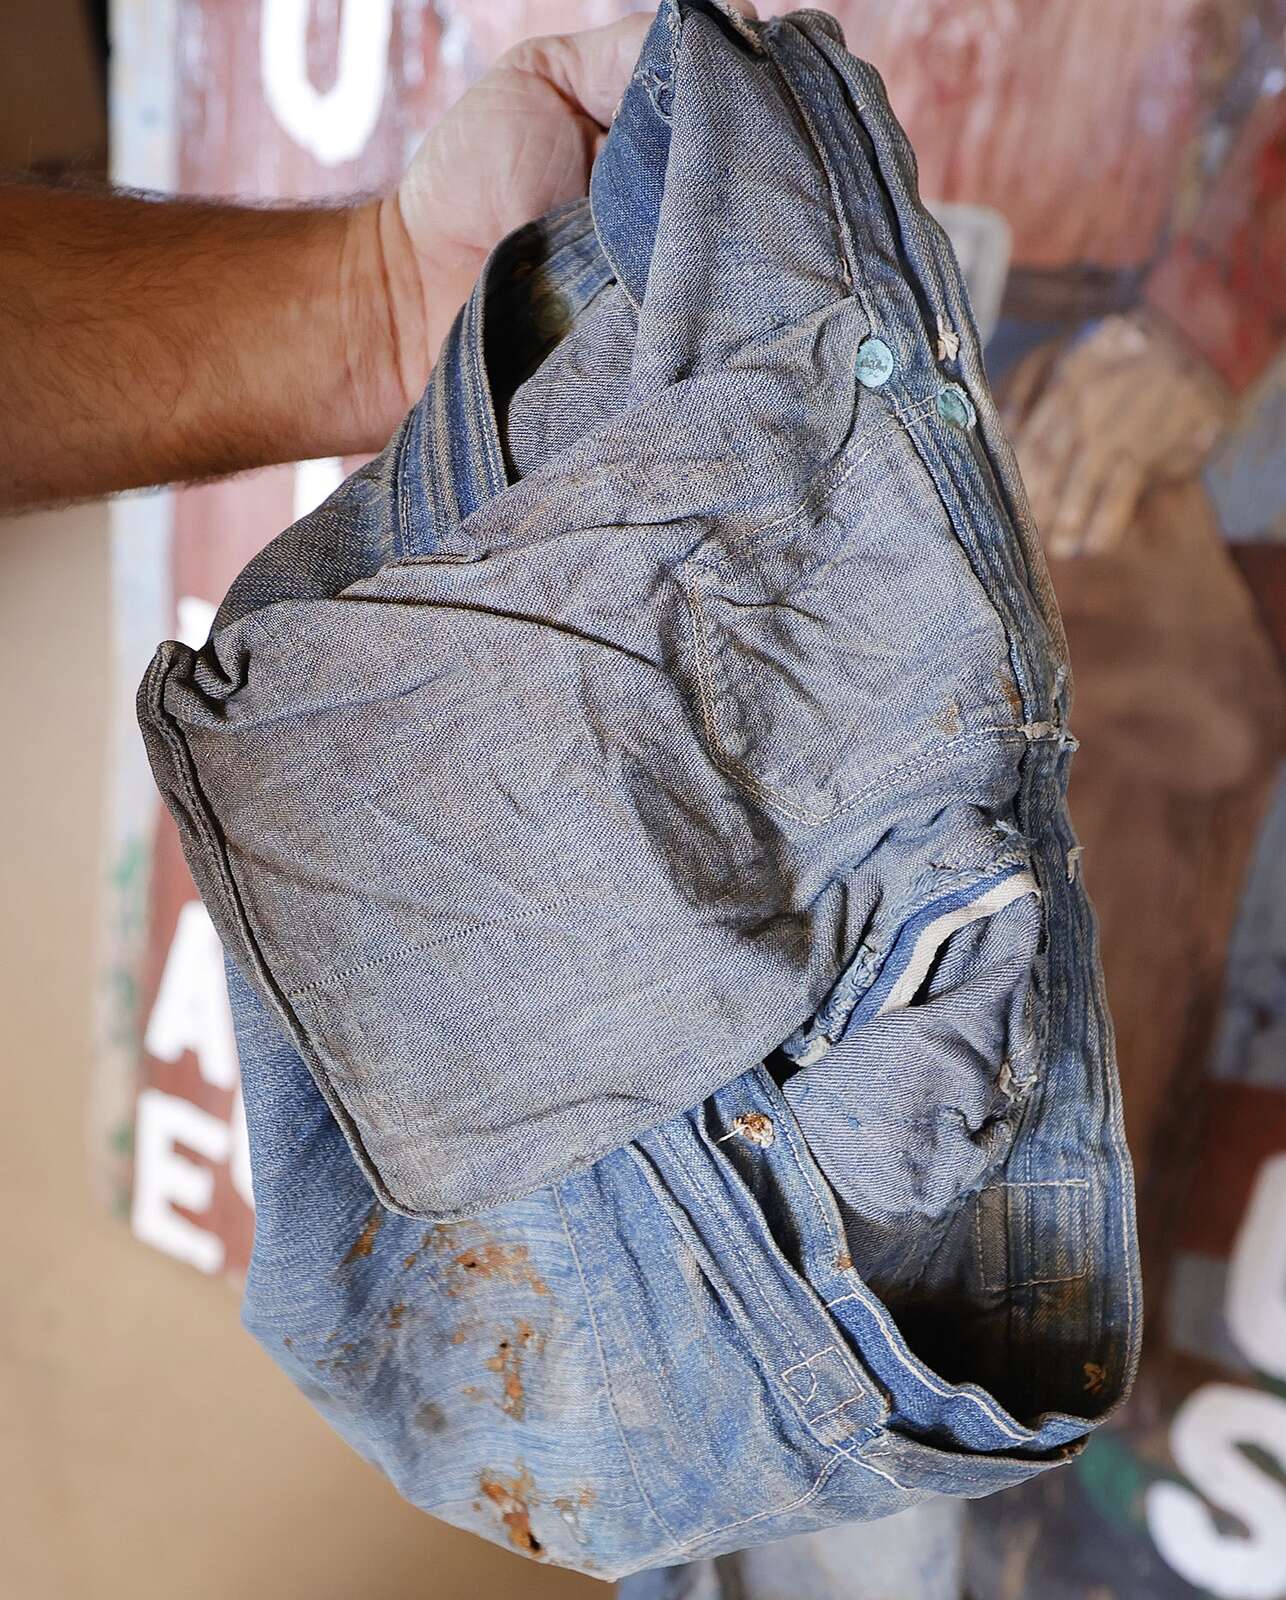 Durango Levi's collector to auction off 'oldest' pair of jeans – The  Durango Herald